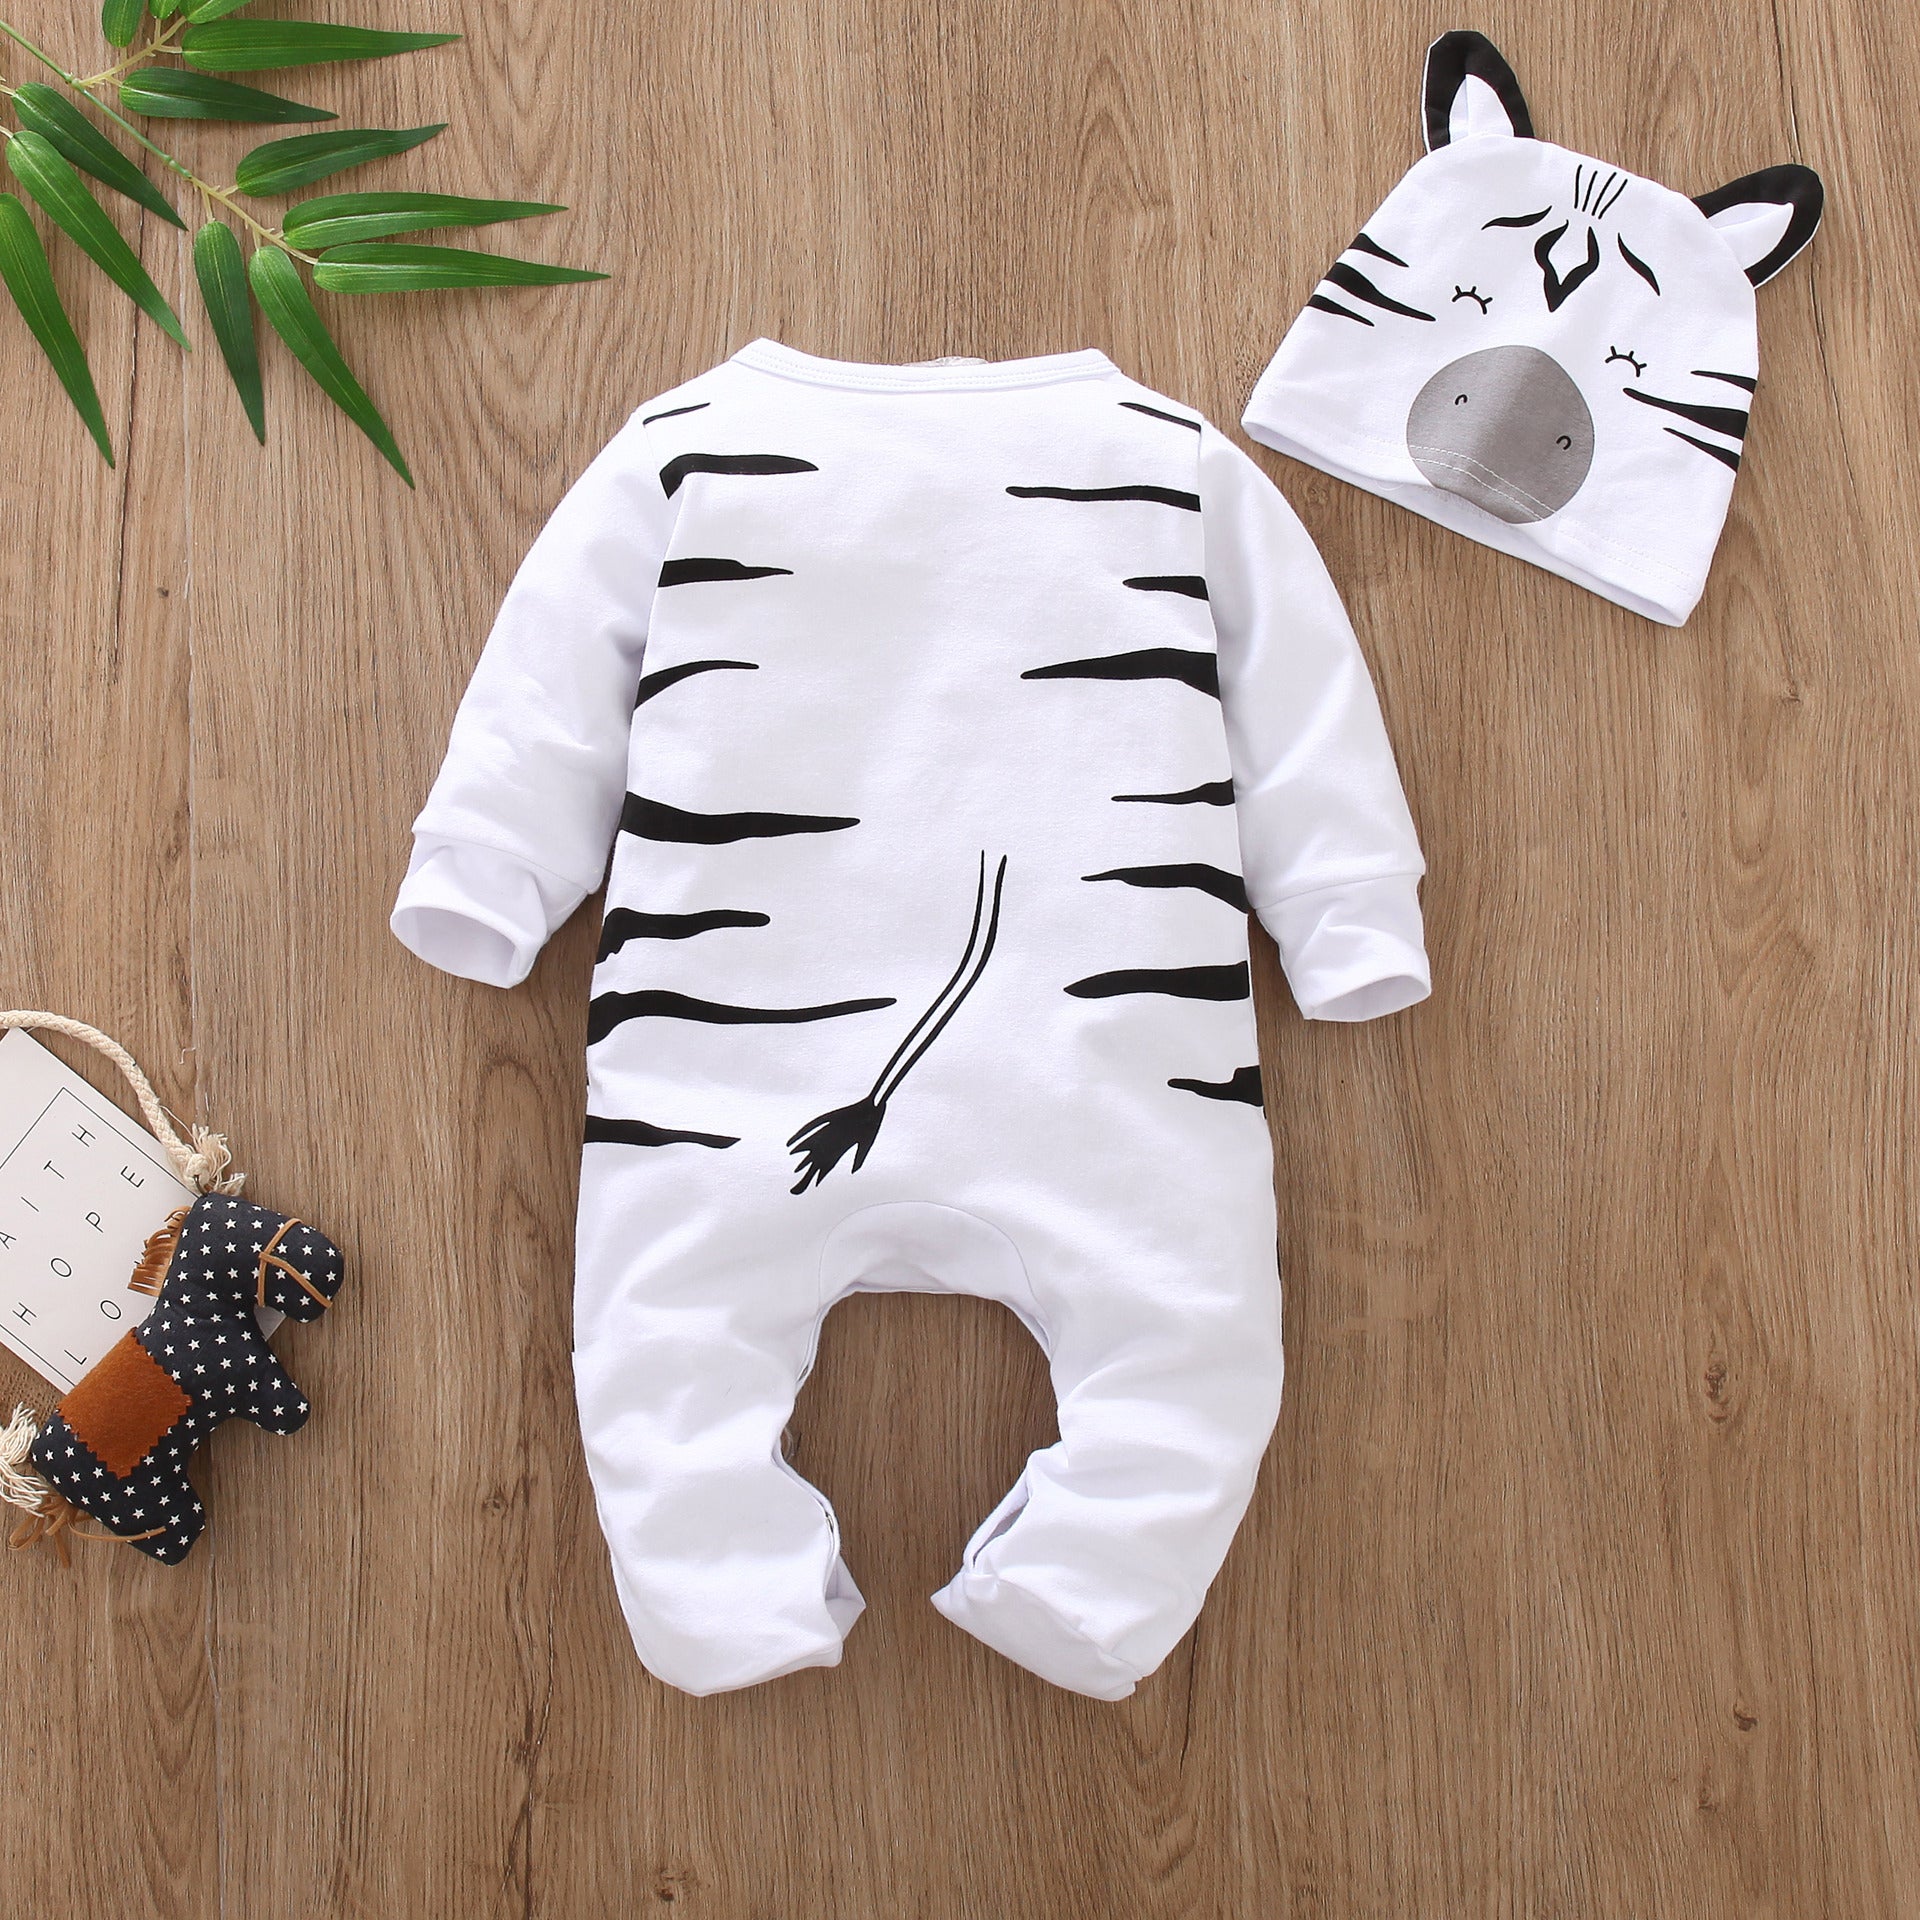 Wrap Your Baby in Cuteness and Comfort with Our Animal Print Romper